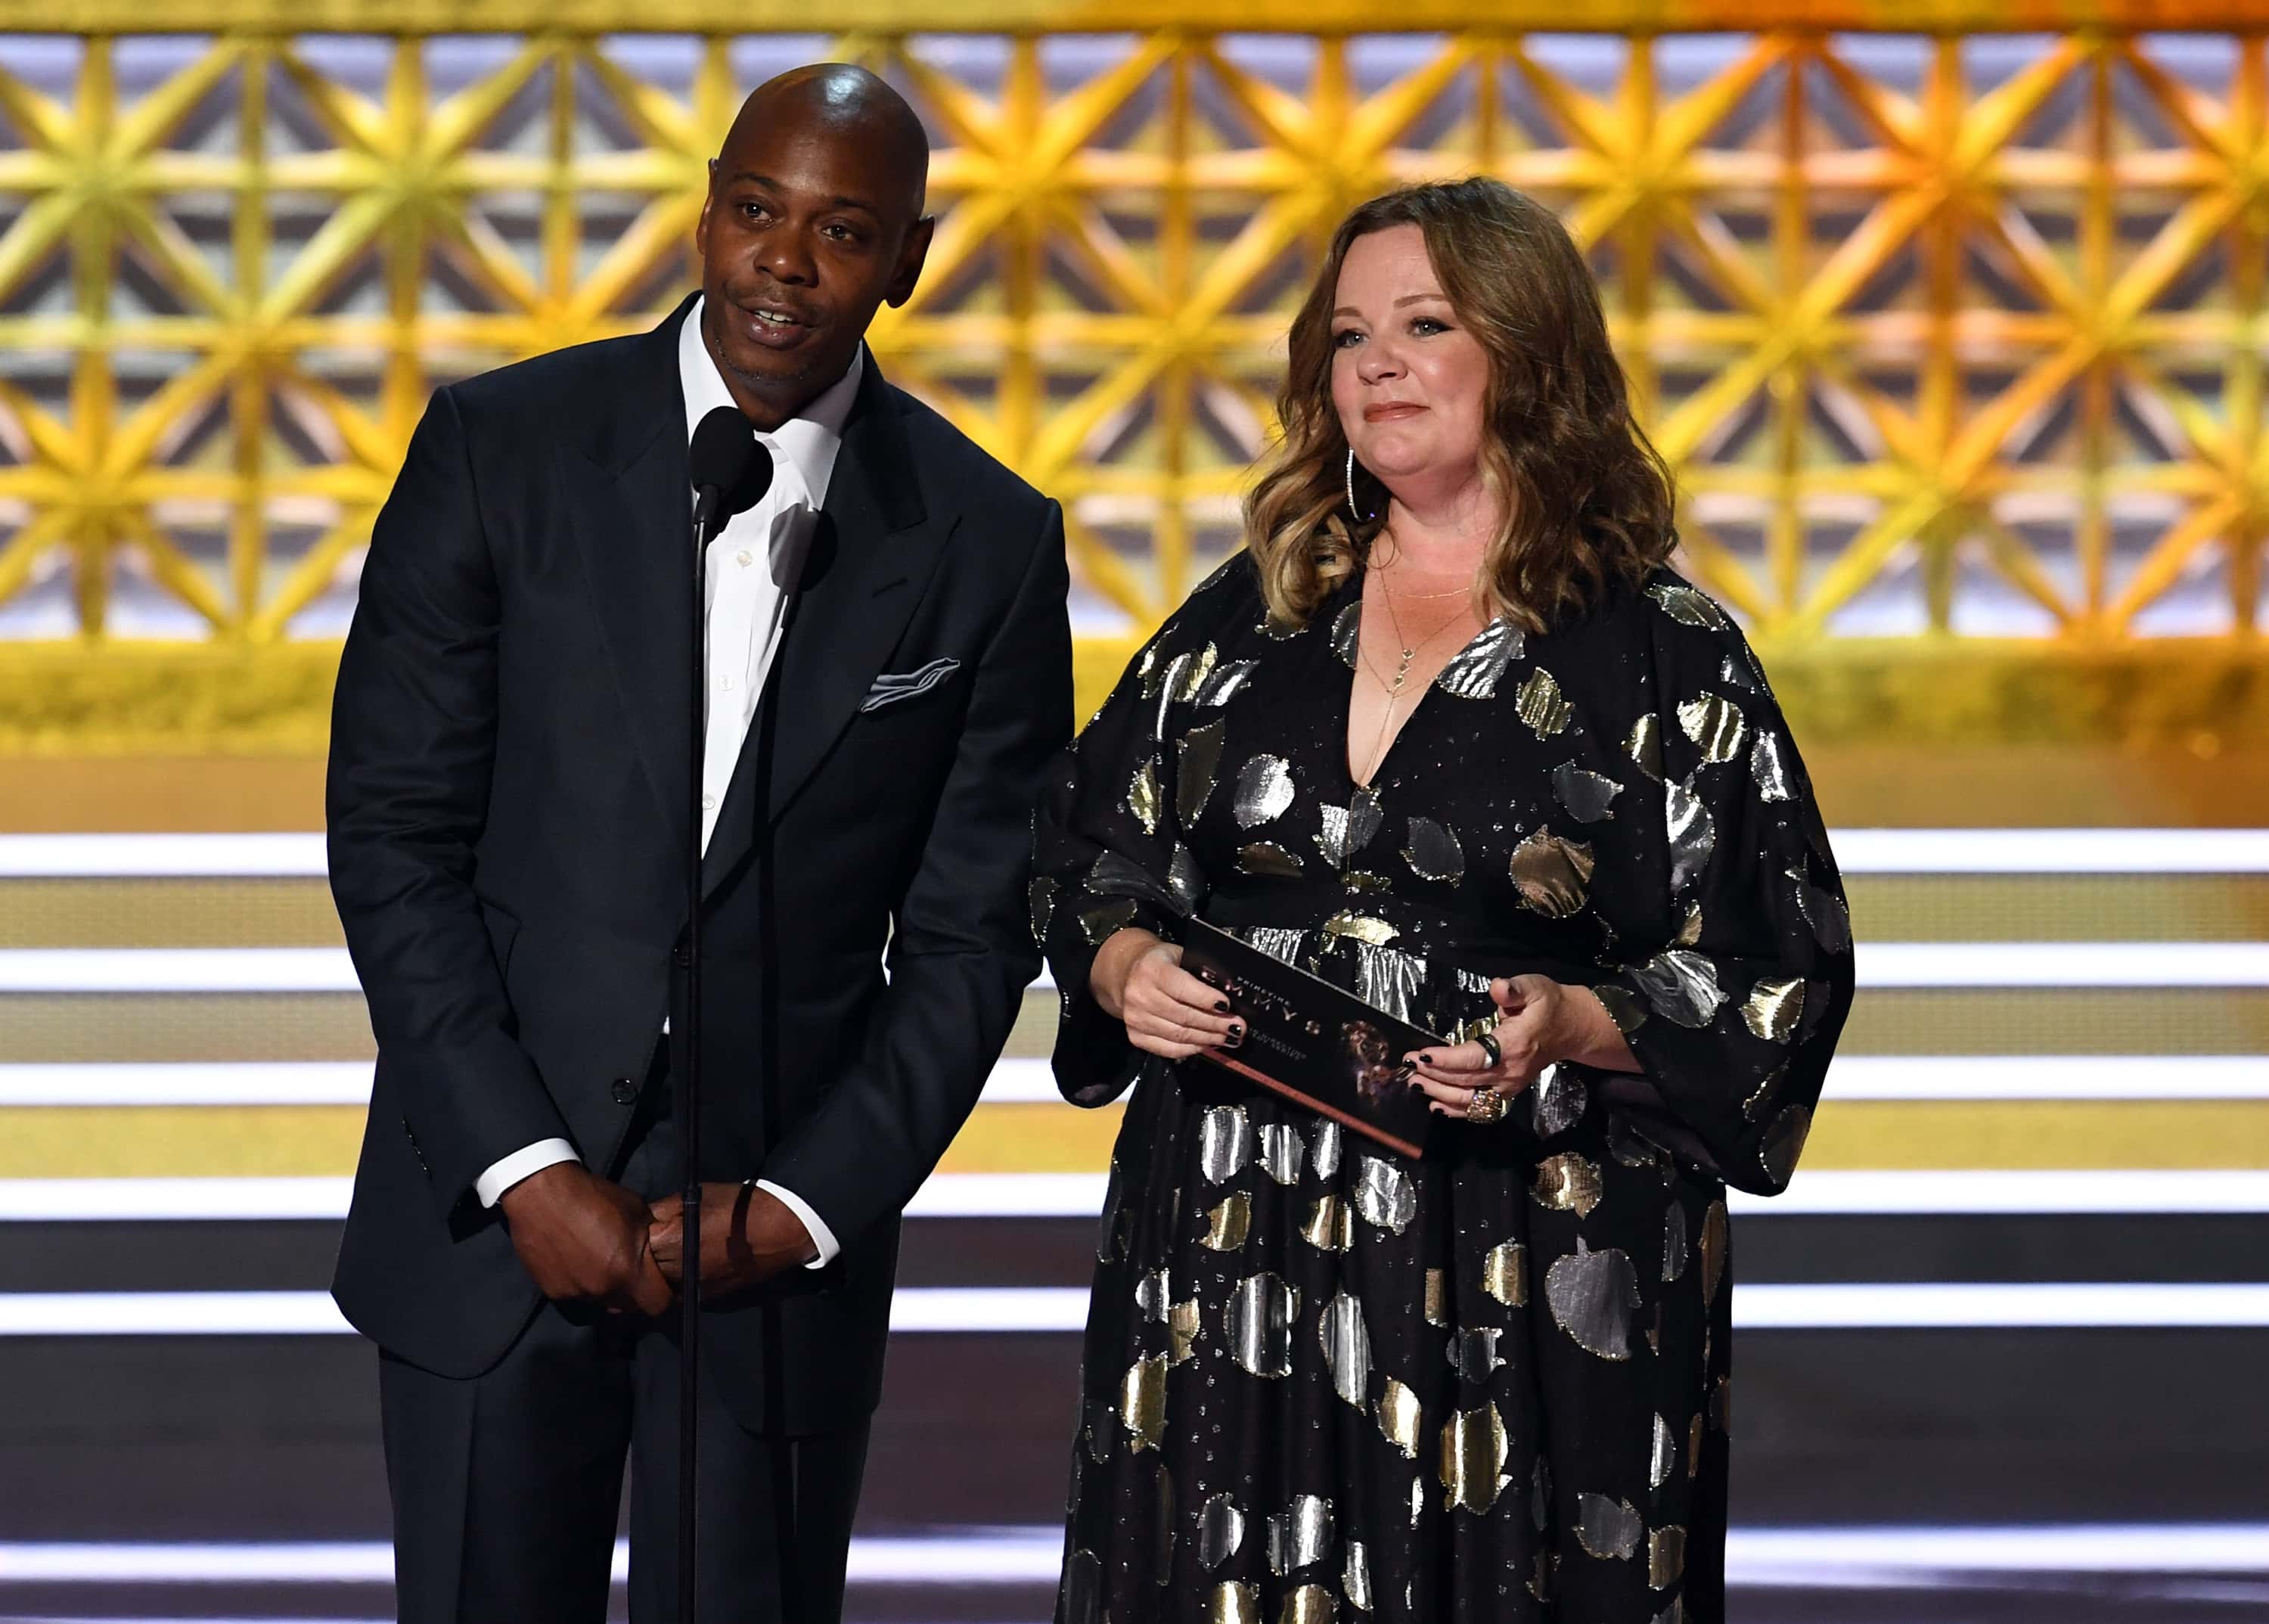 69th Annual Primetime Emmy Awards - Show. Dave Chappelle and Melissa McCarthy.